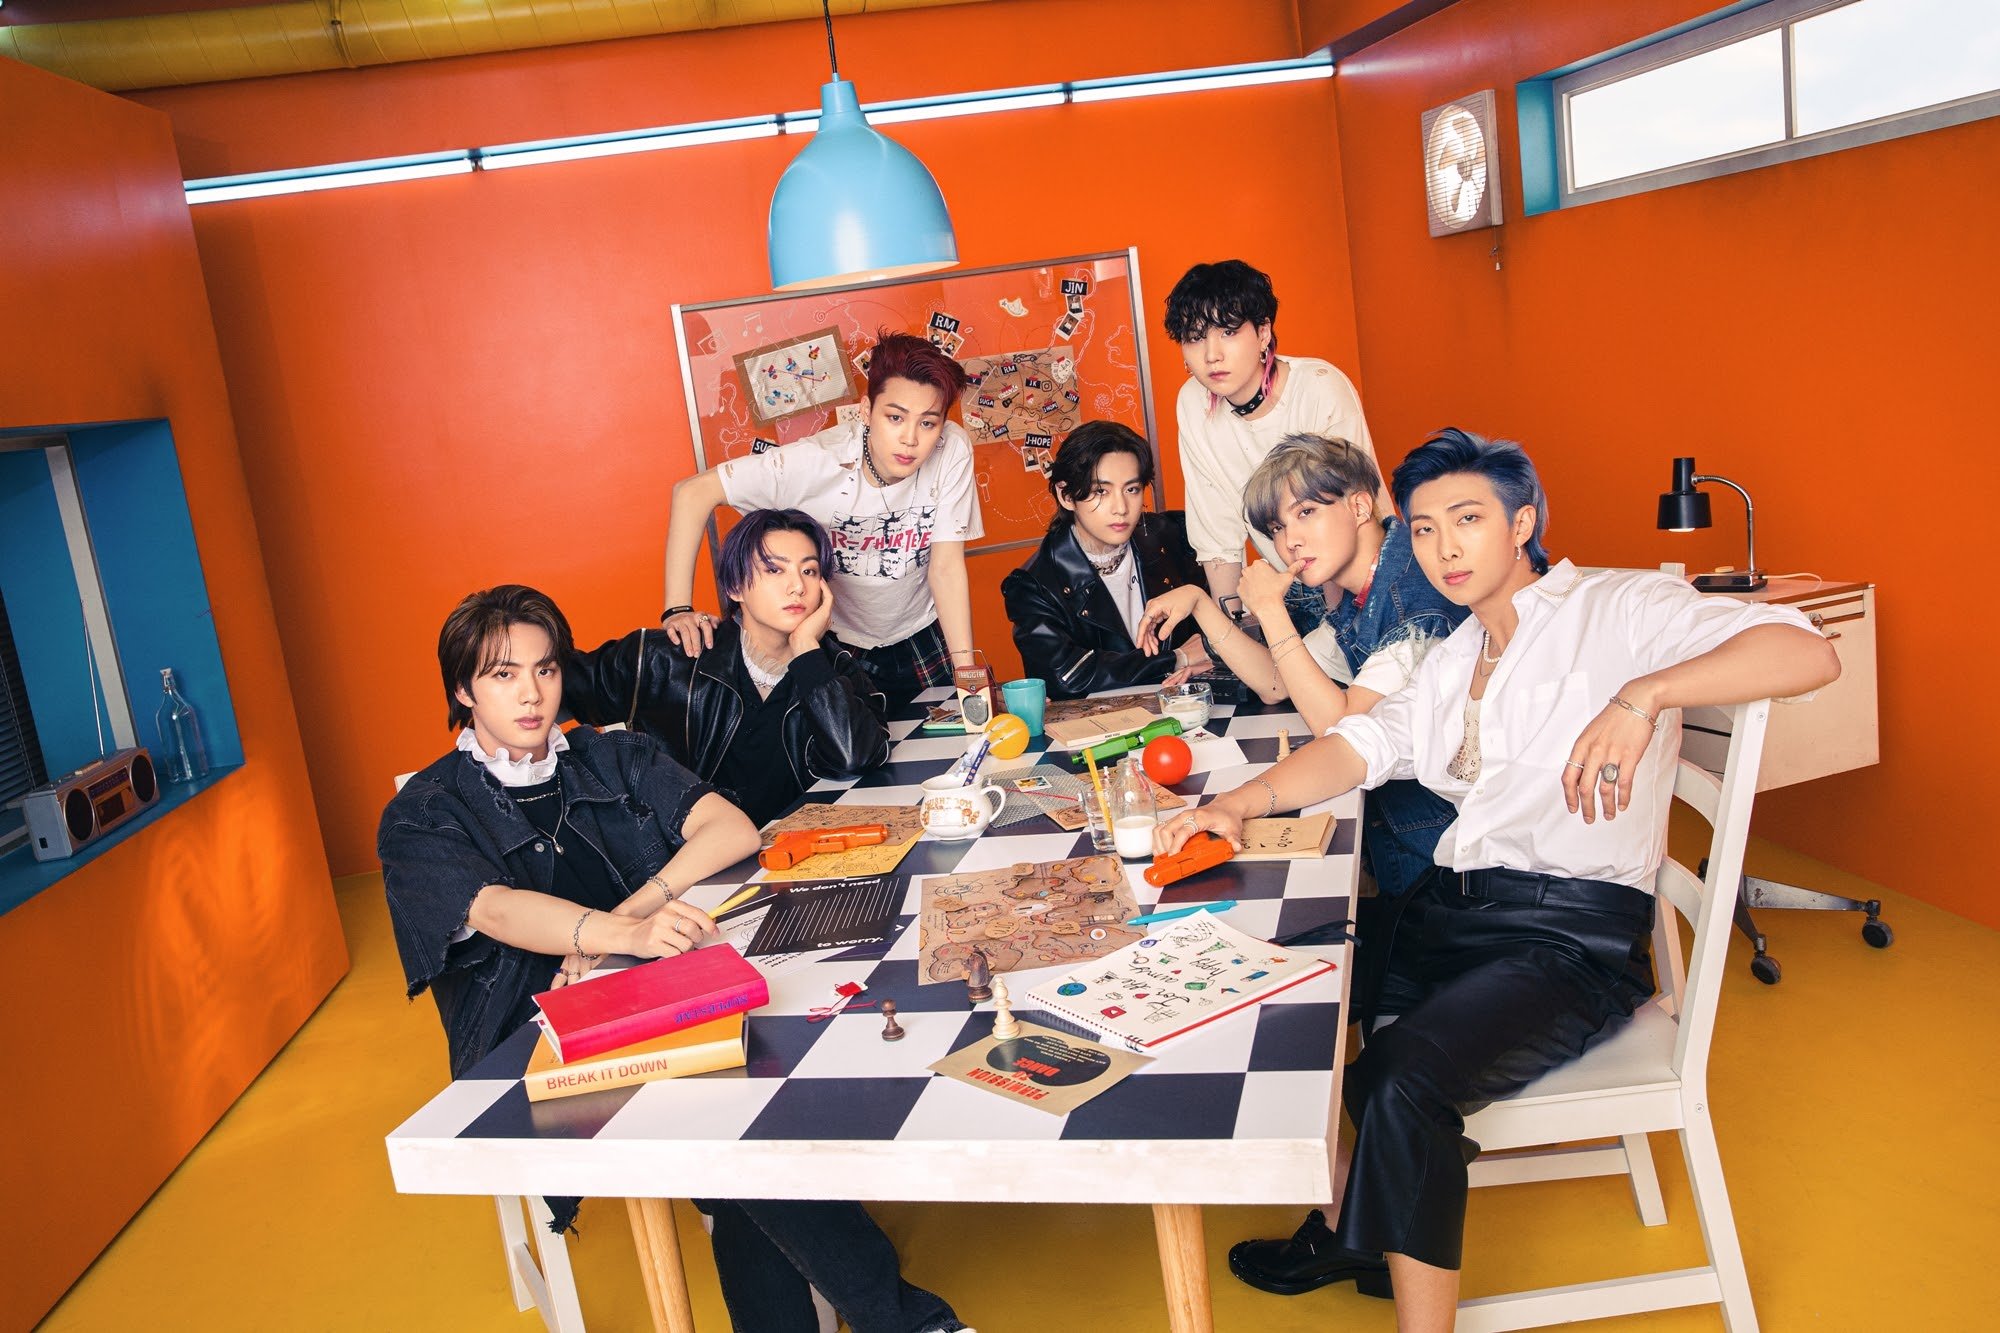 Jin, Jungkook, Jimin, V, Suga, J-Hope, and RM of BTS pose around a black-and-white table